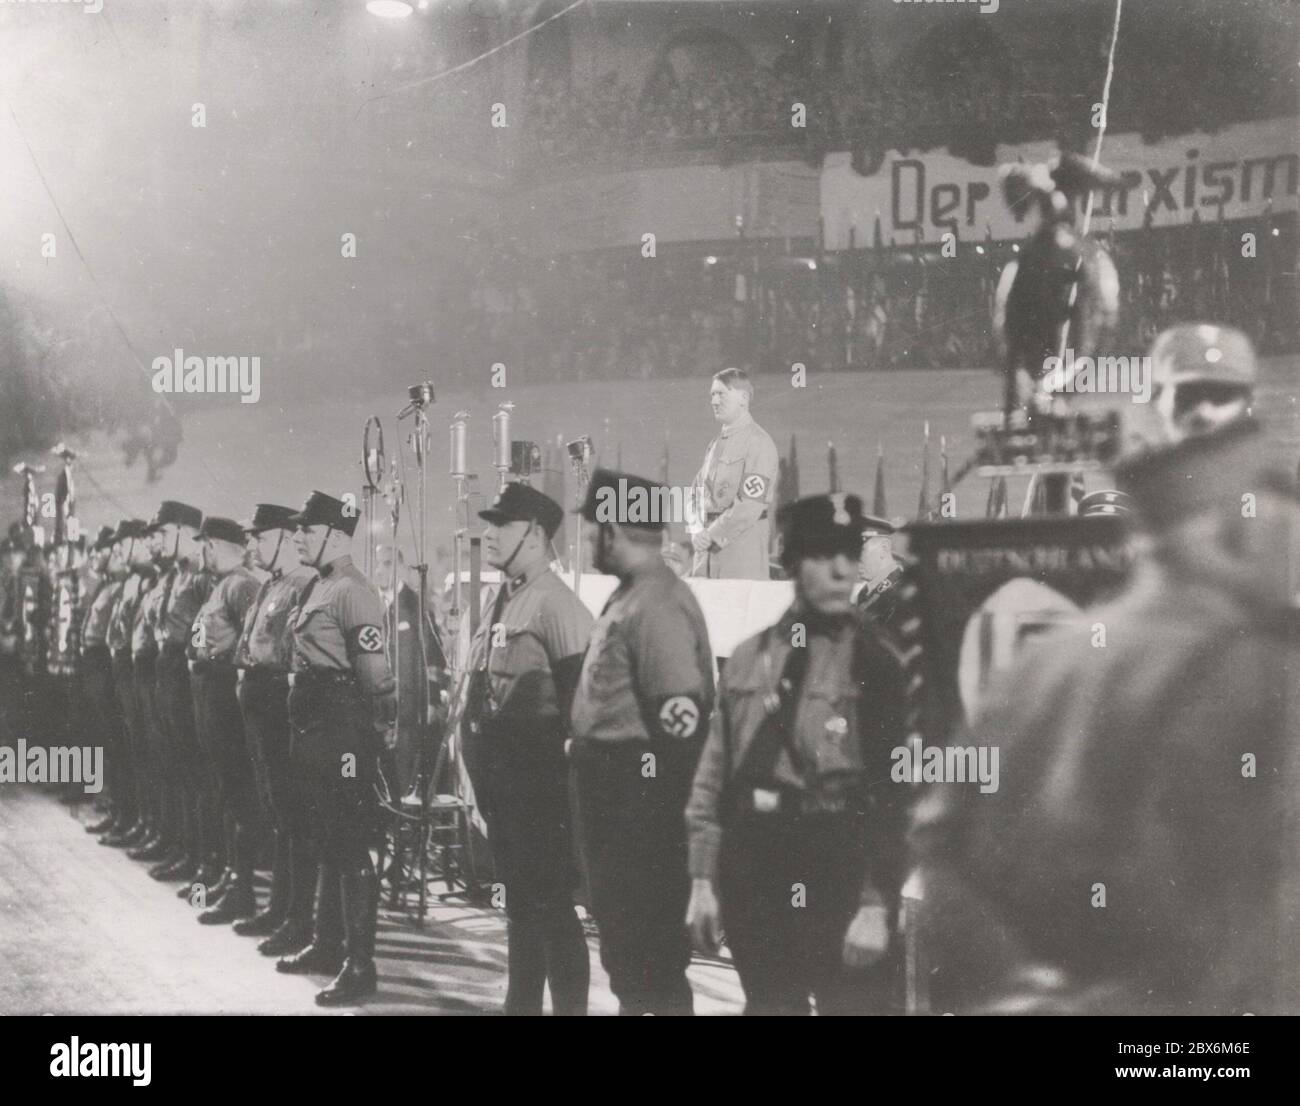 Hitler speaking at the Sportpalast. Heinrich Hoffmann Photographs 1933 Adolf Hitler's official photographer, and a Nazi politician and publisher, who was a member of Hitler's intimate circle. Stock Photo